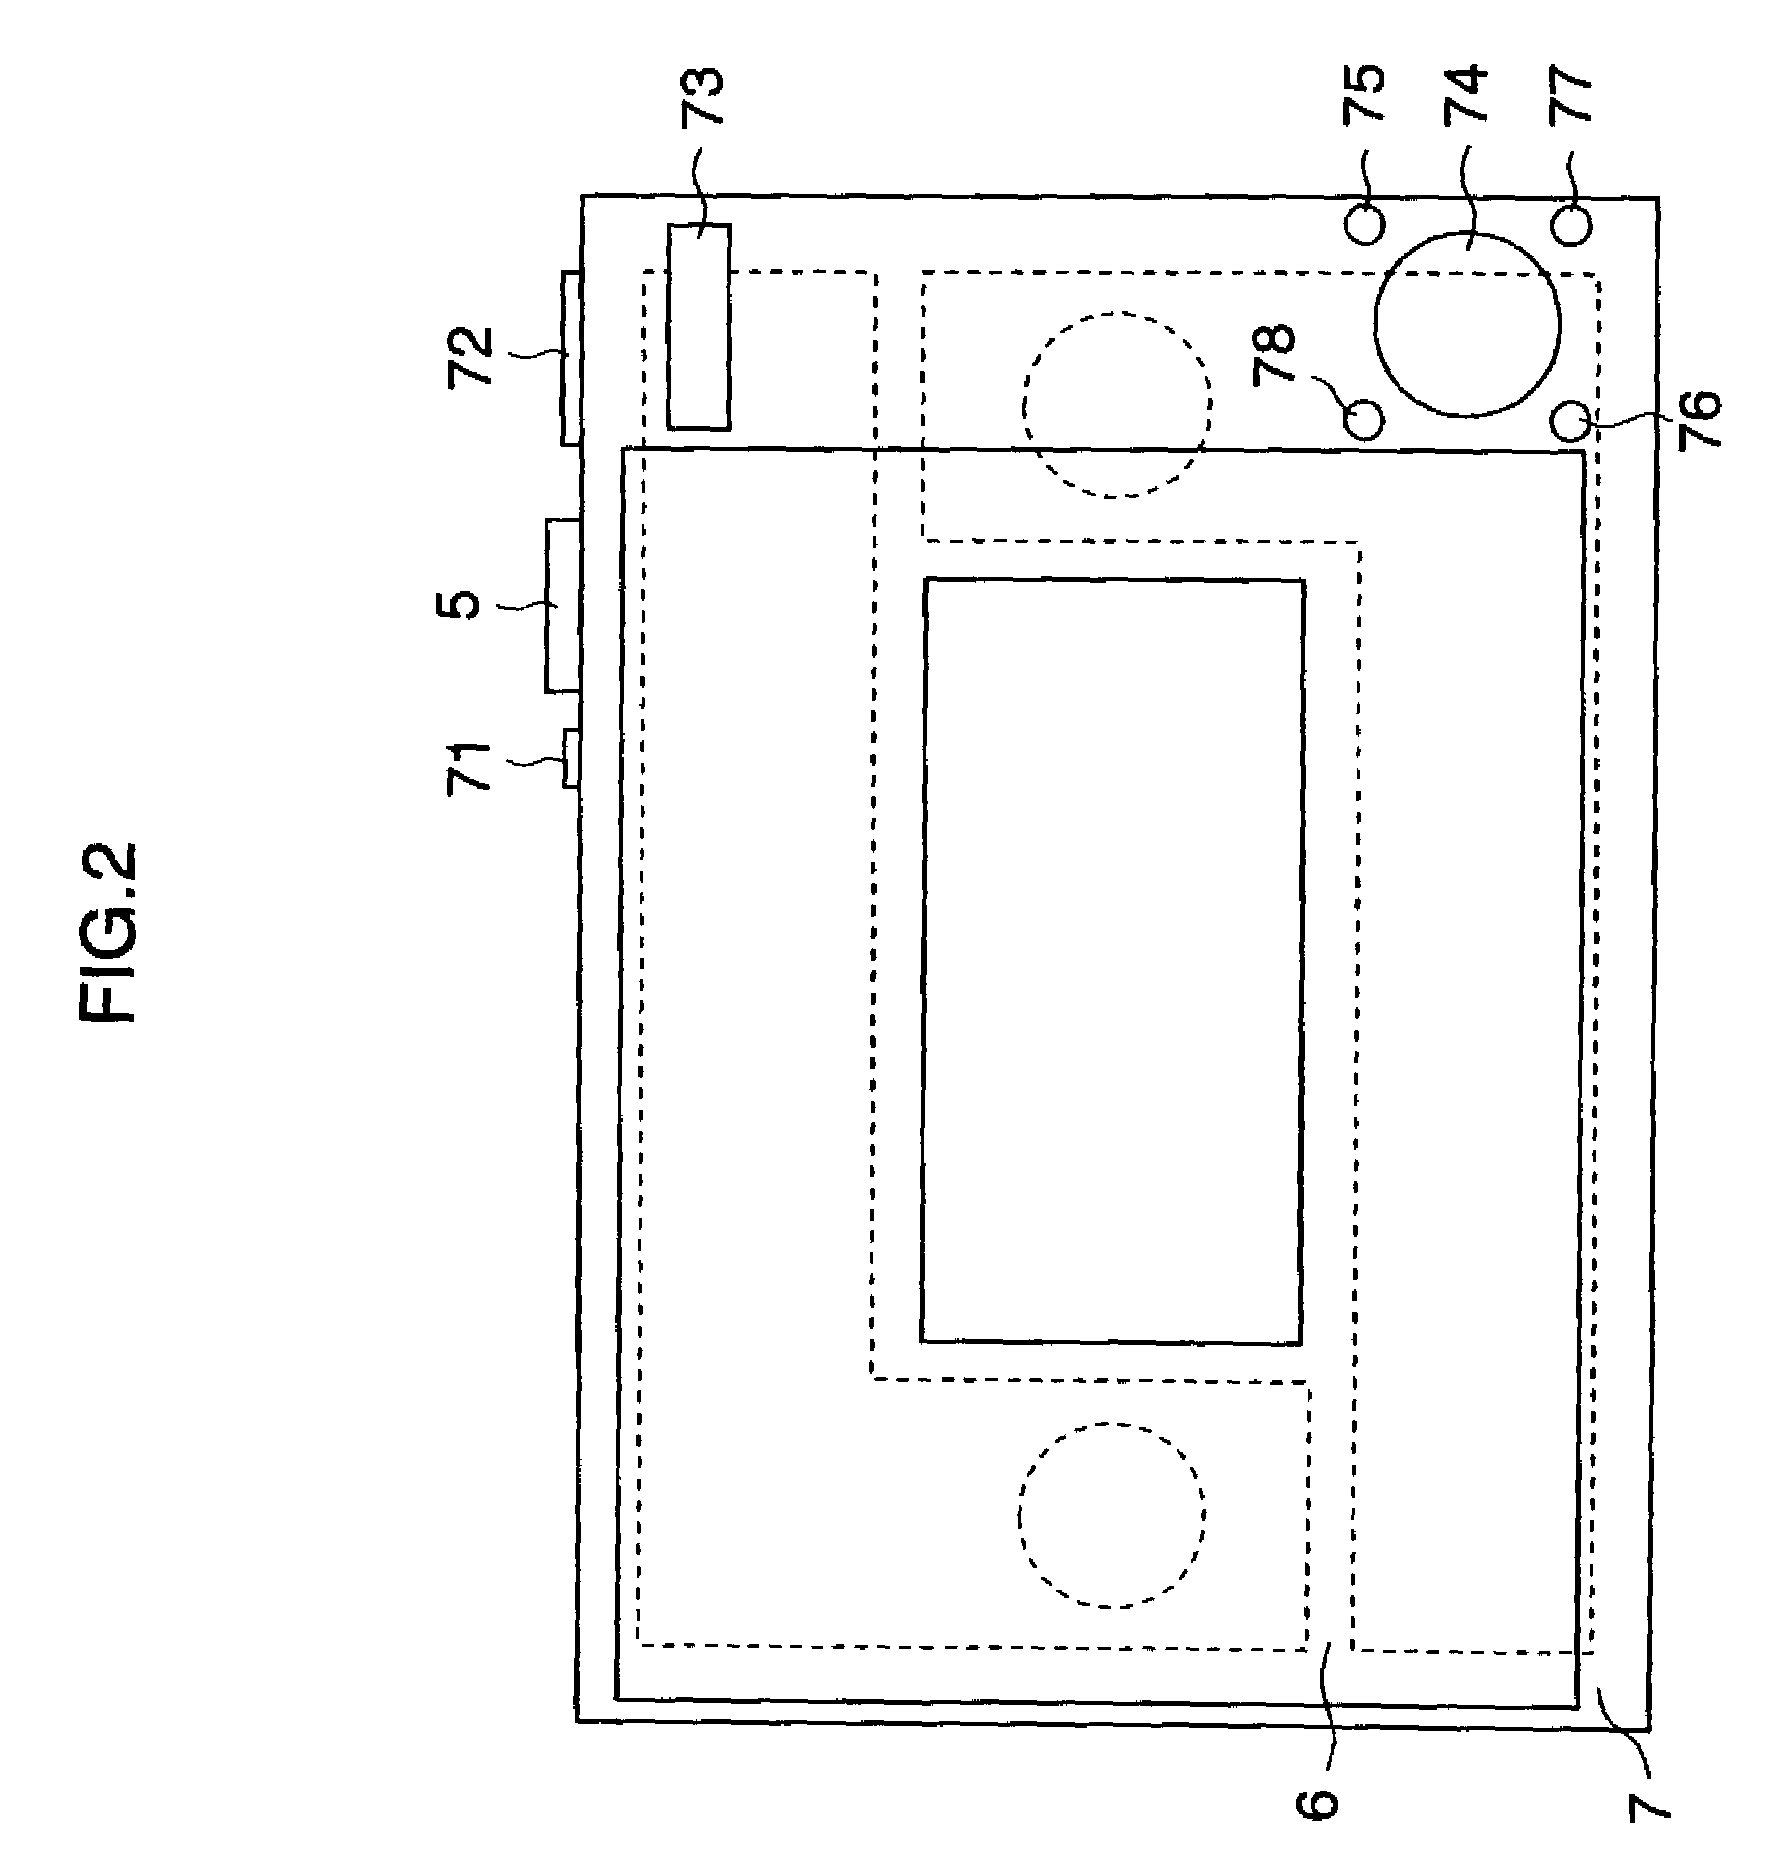 Stereoscopic imaging device